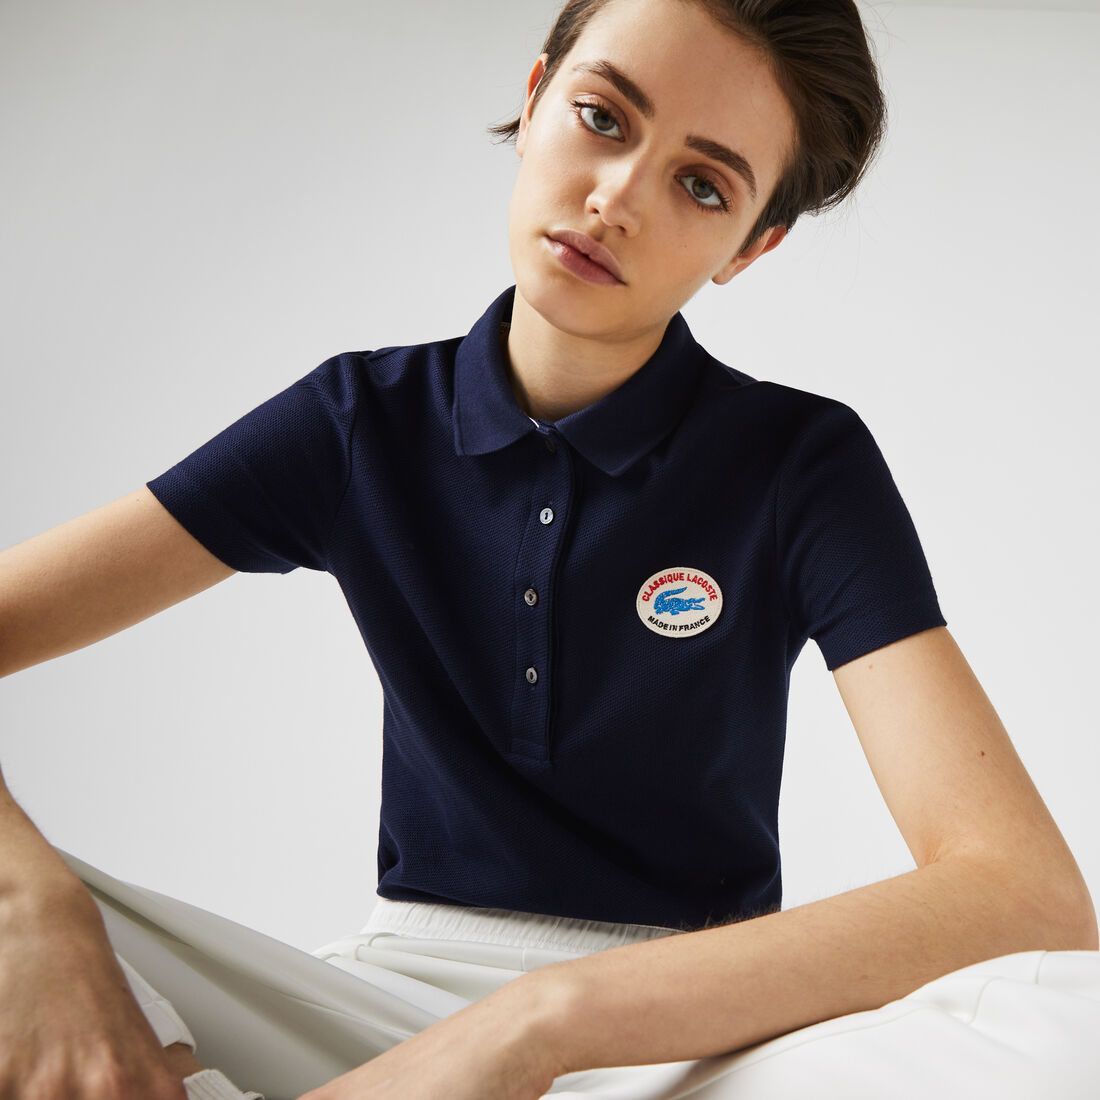 Women’s Lacoste Made In France Slim Fit Organic Cotton Piqué Polo